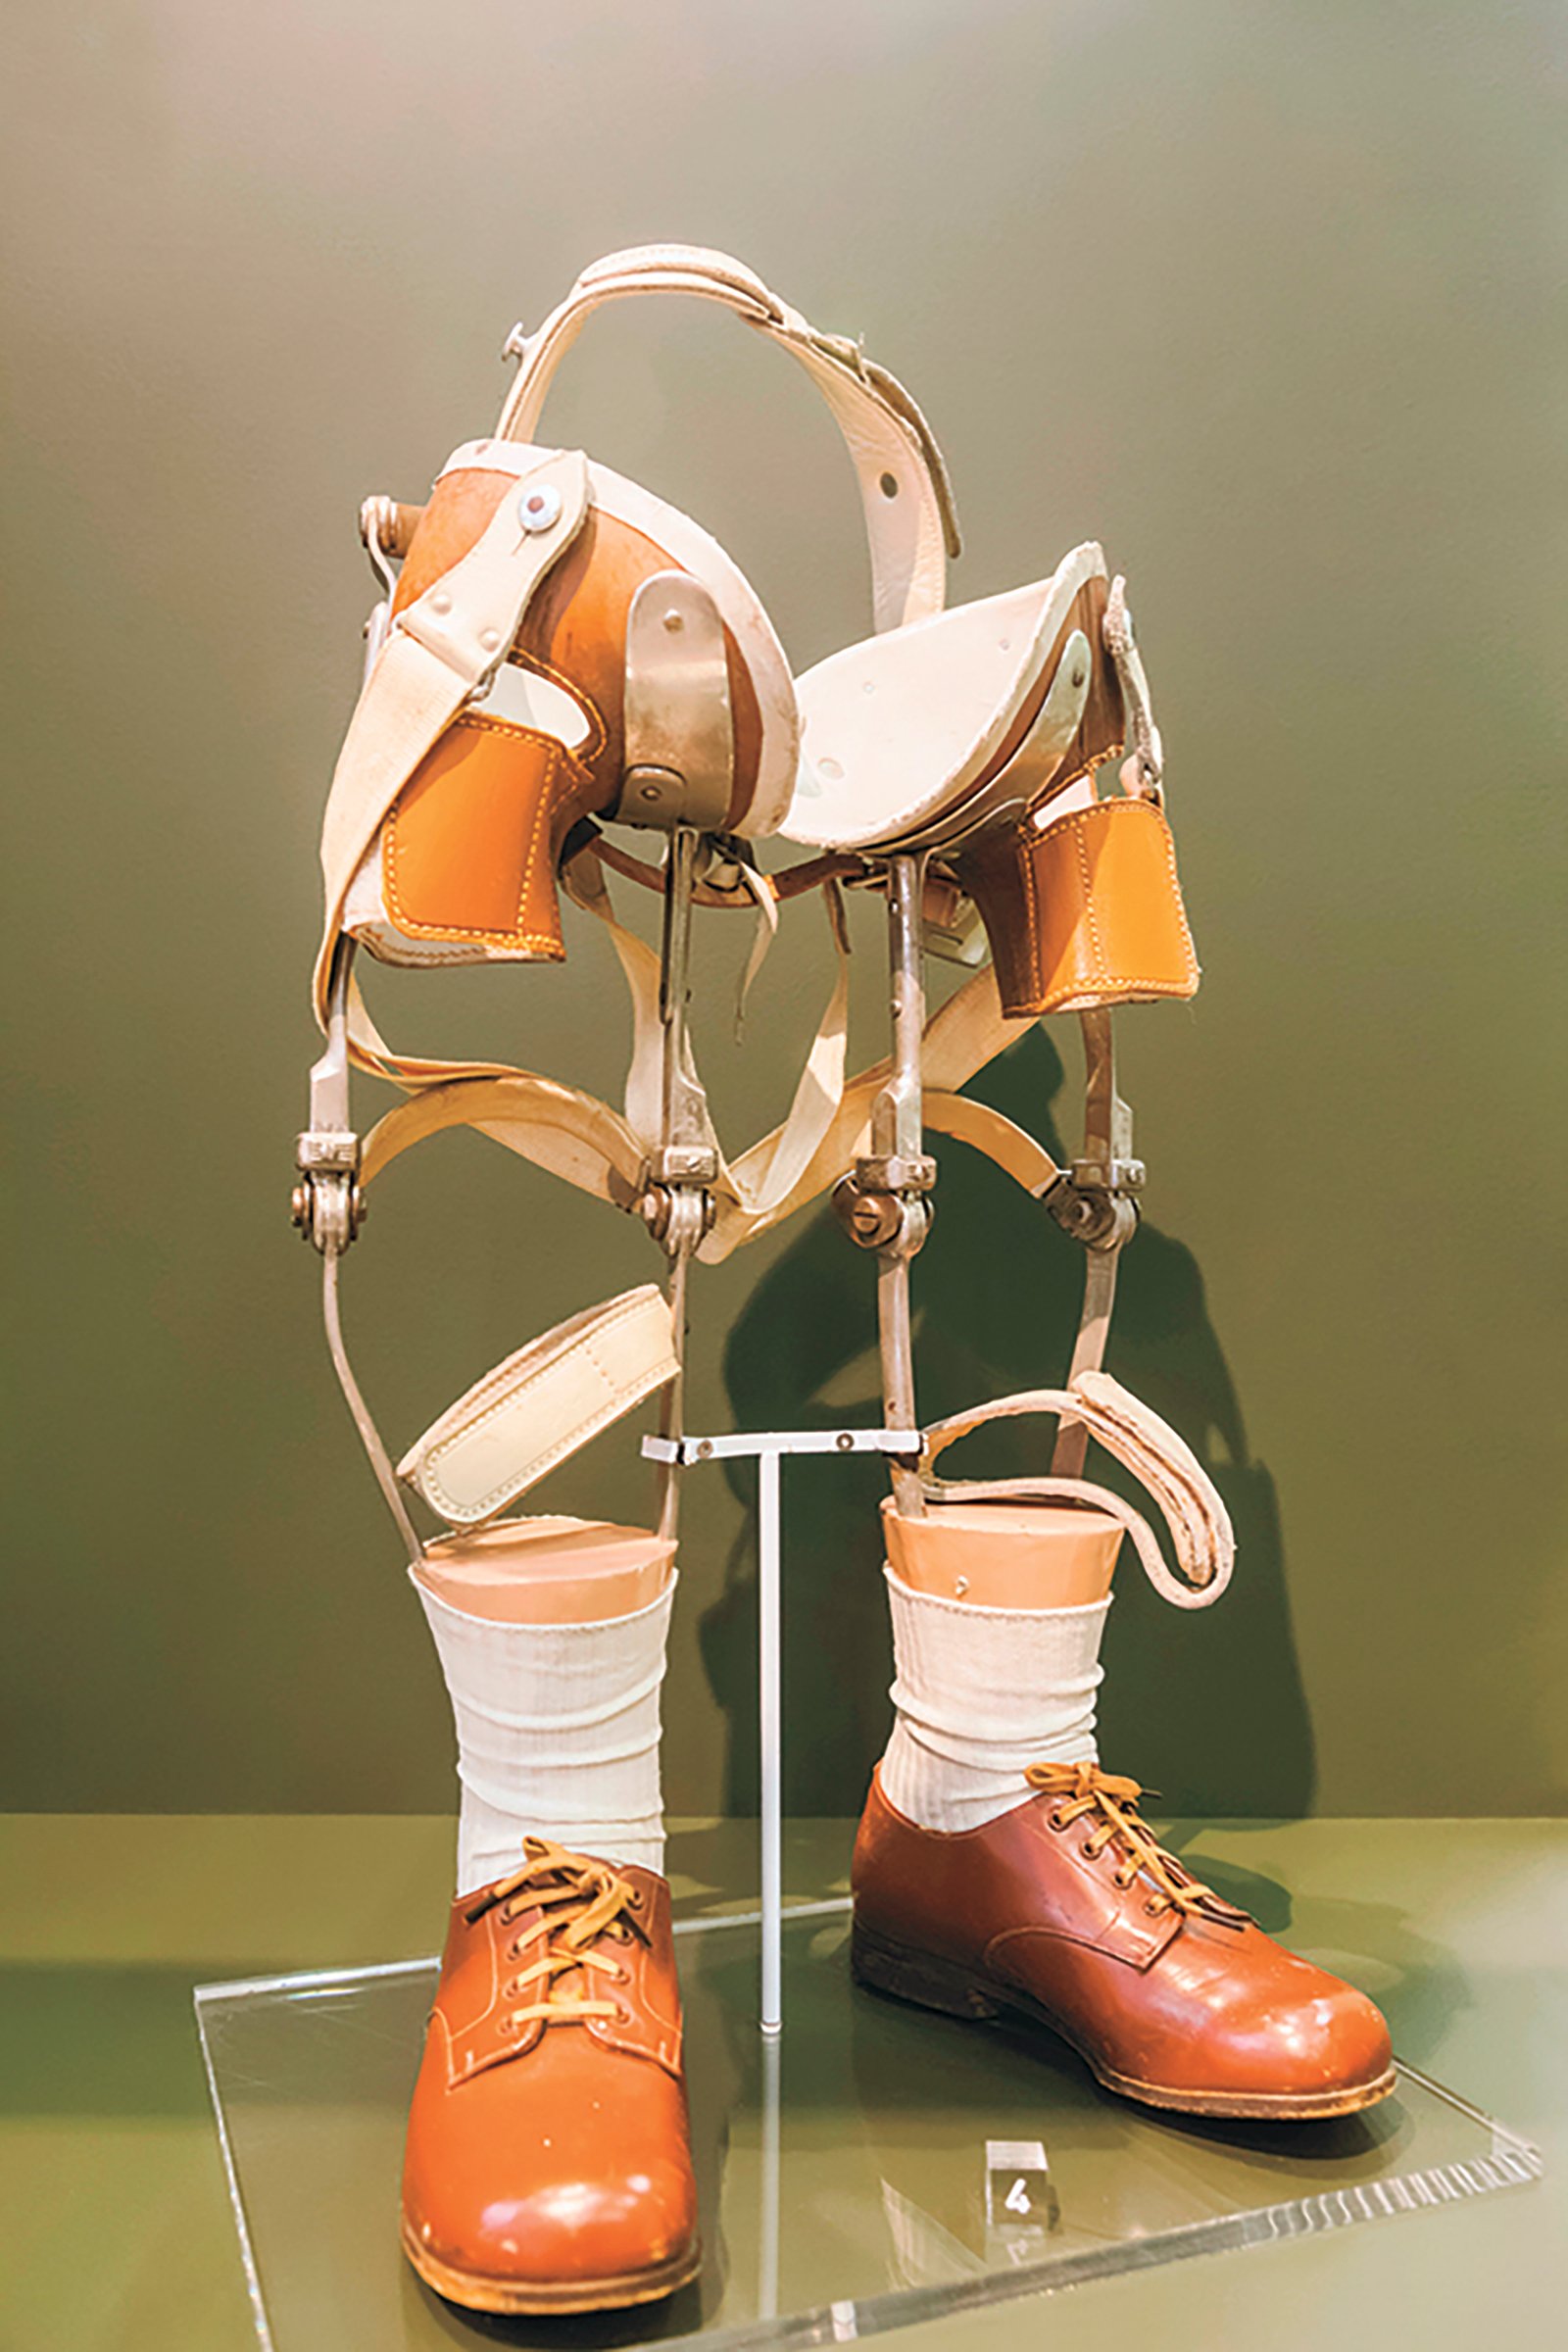 Prosthesis for a child affected by thalidomide, London Science Museum © mauritius images GmbH/Alamy